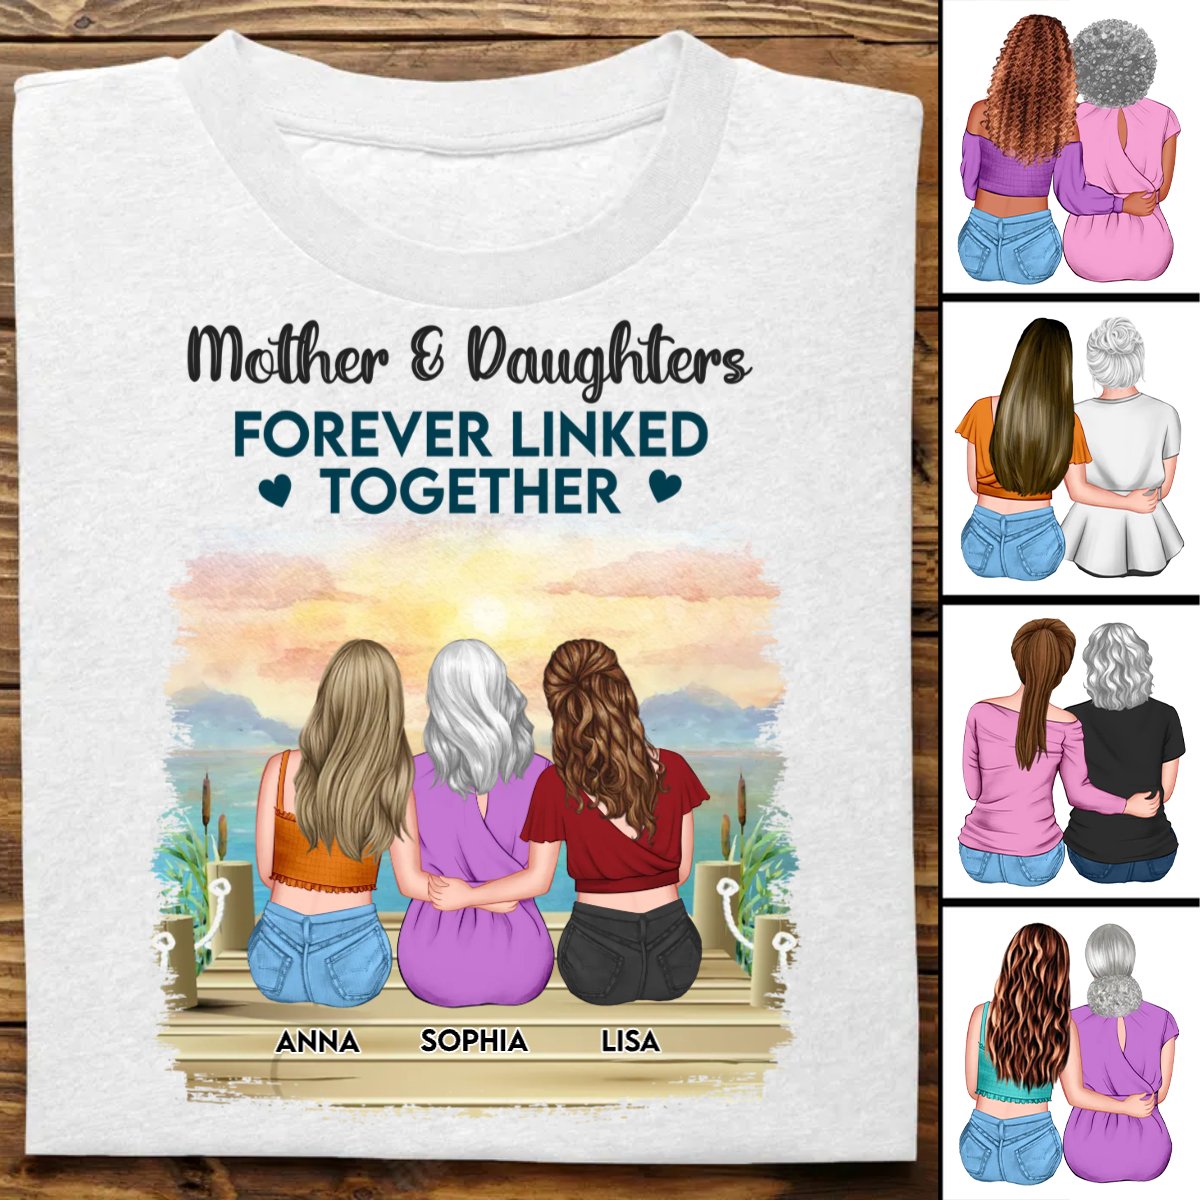 Family - Mother & Daughters Forever Linked Together - Personalized Unisex T - Shirt - The Next Custom Gift